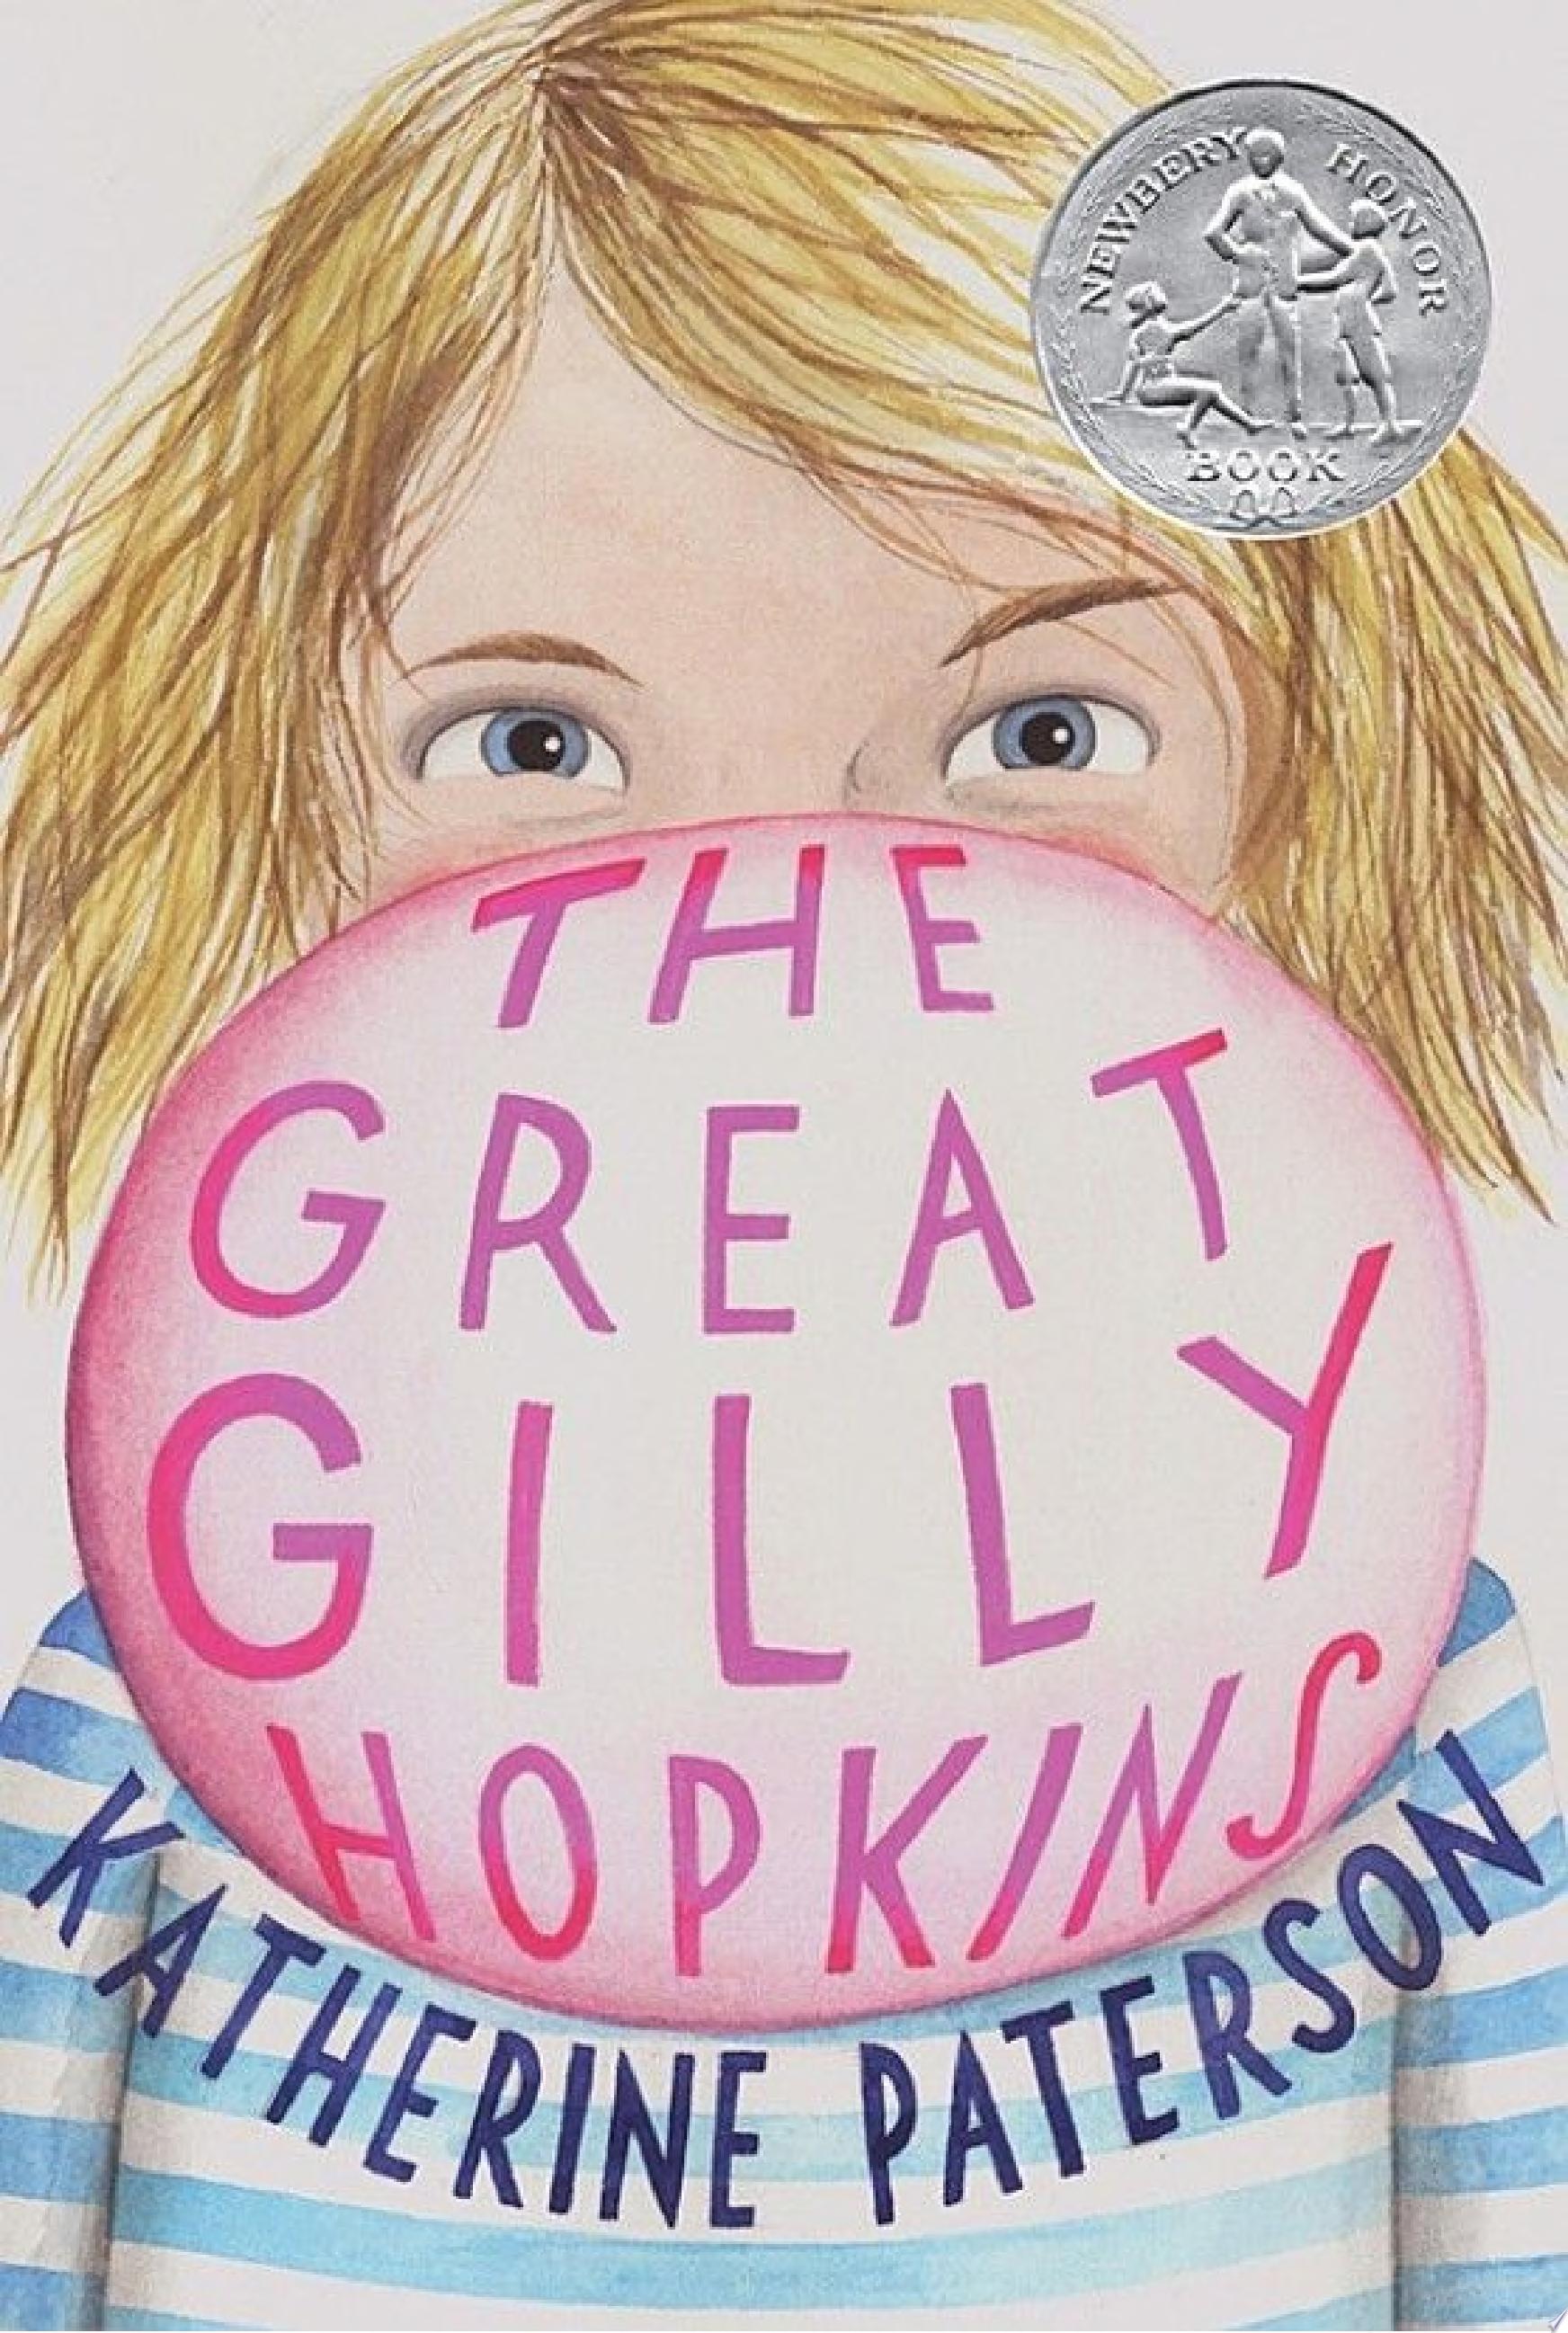 Image for "The Great Gilly Hopkins"